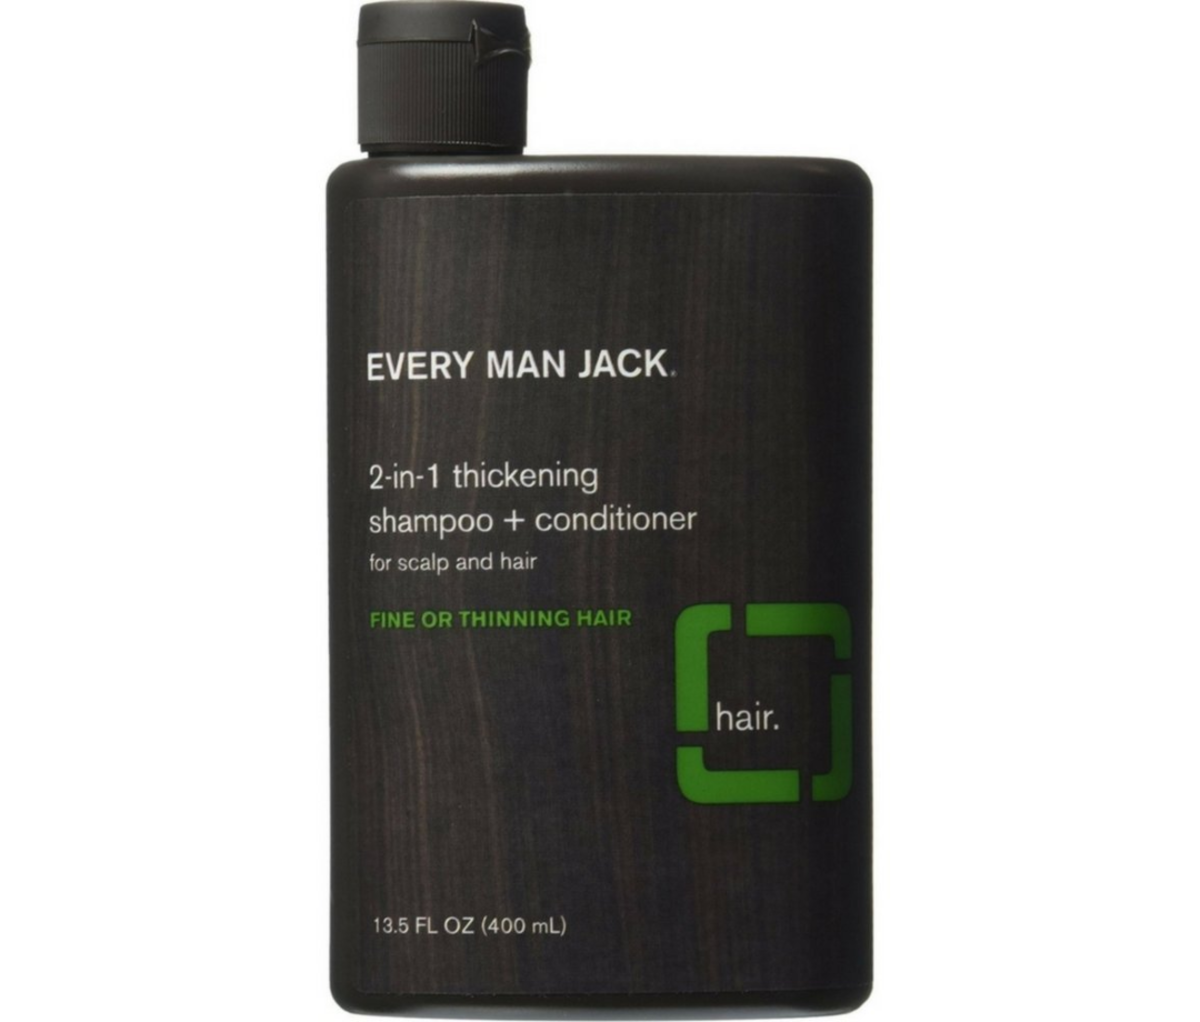 Every Man Jack 2 in 1